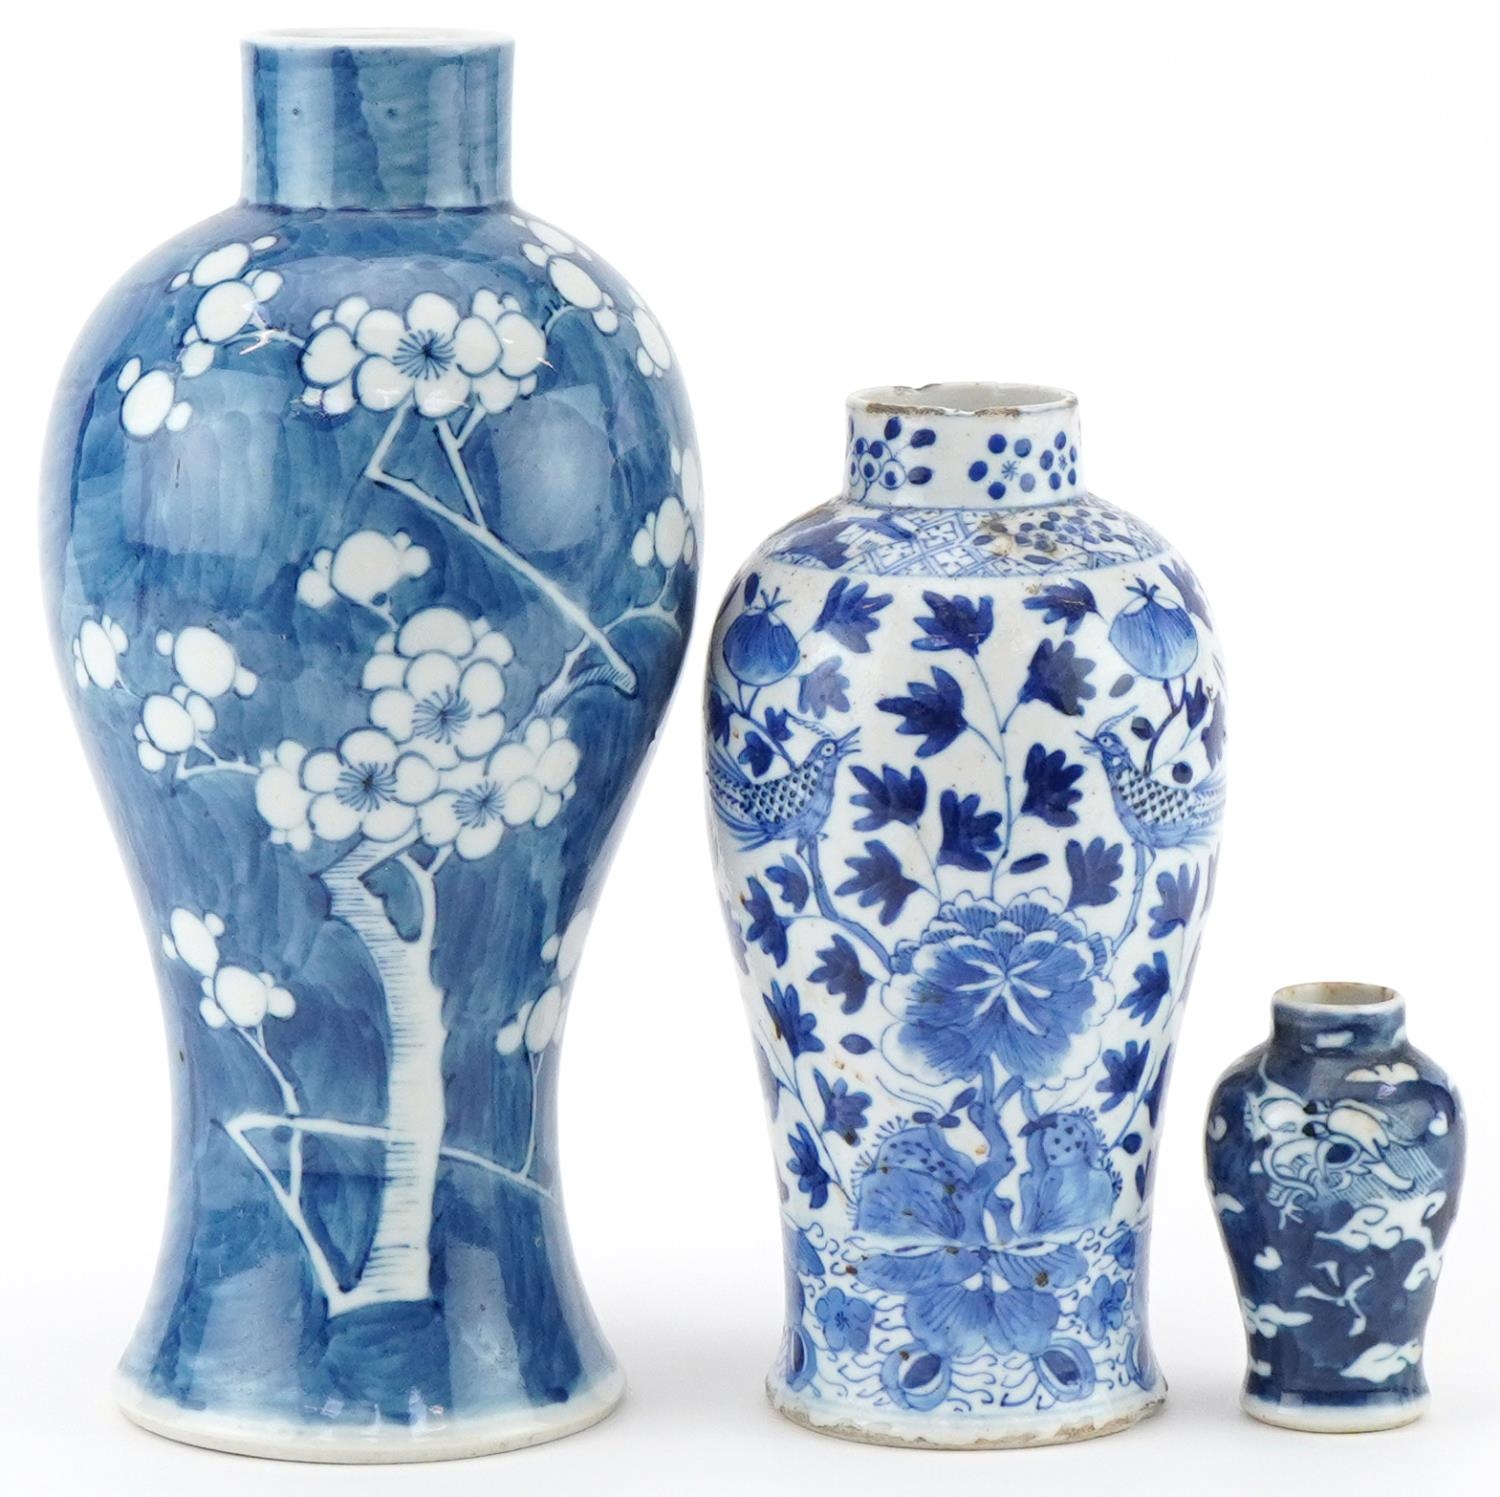 Chinese hand painted blue and white prunus vase, Chinese vase decorated with birds amongst flowers